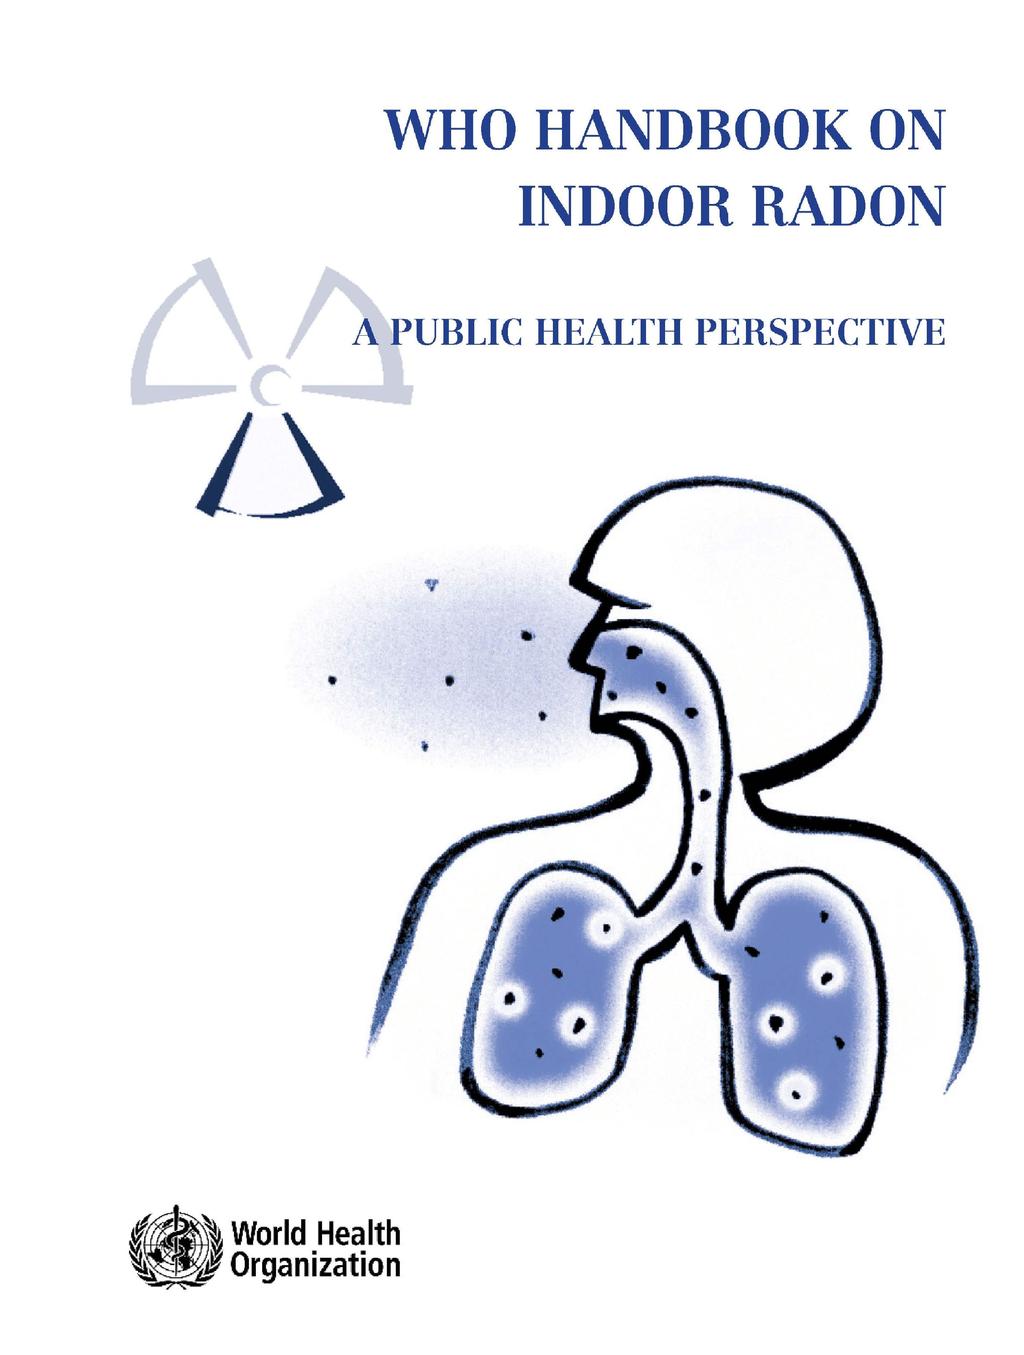 Recent and forthcoming recommenda1ons and regula1ons WHO Handbook on Indoor Radon (2009) A Public Health Perspec1ve Structure Introduc1on 1.